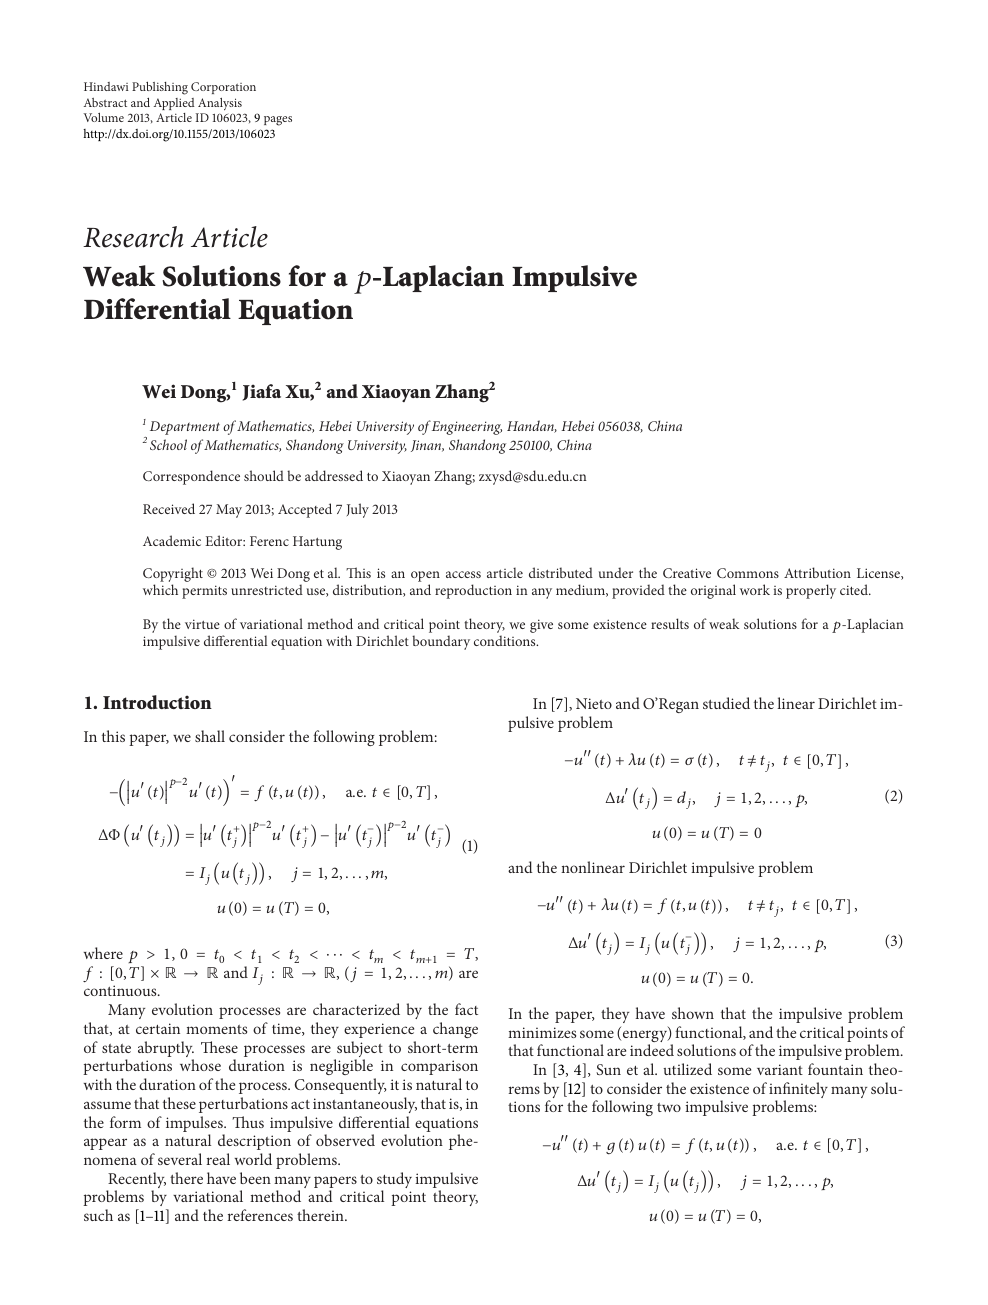 Weak Solutions For A P Laplacian Impulsive Differential Equation Topic Of Research Paper In Mathematics Download Scholarly Article Pdf And Read For Free On Cyberleninka Open Science Hub